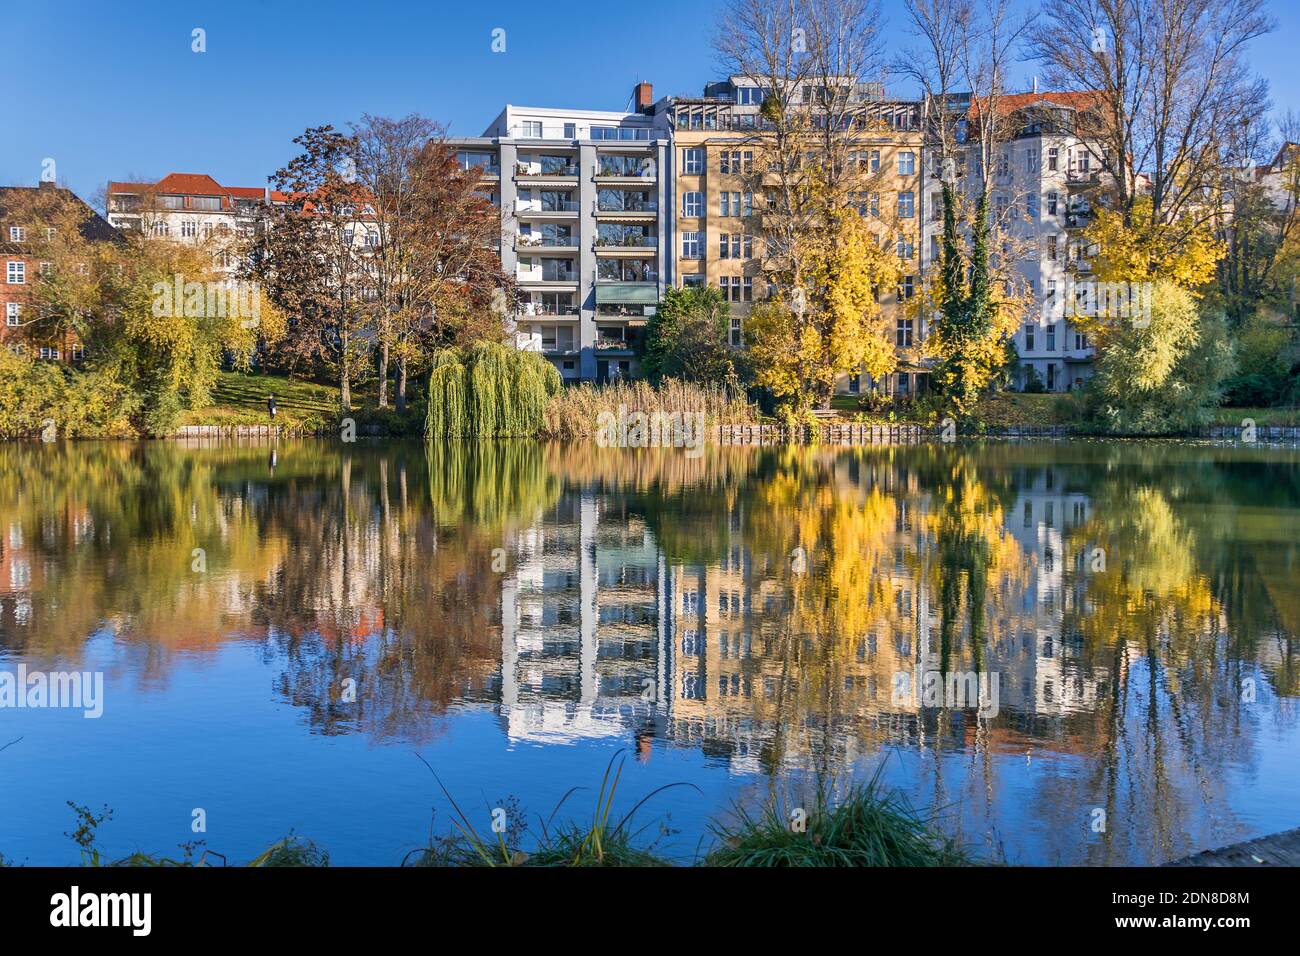 Berlin, Germany - November 7, 2020: Park and a listed garden Lietzensee and buildings on the shore of Lake Lietzen with its facades reflecting in the Stock Photo